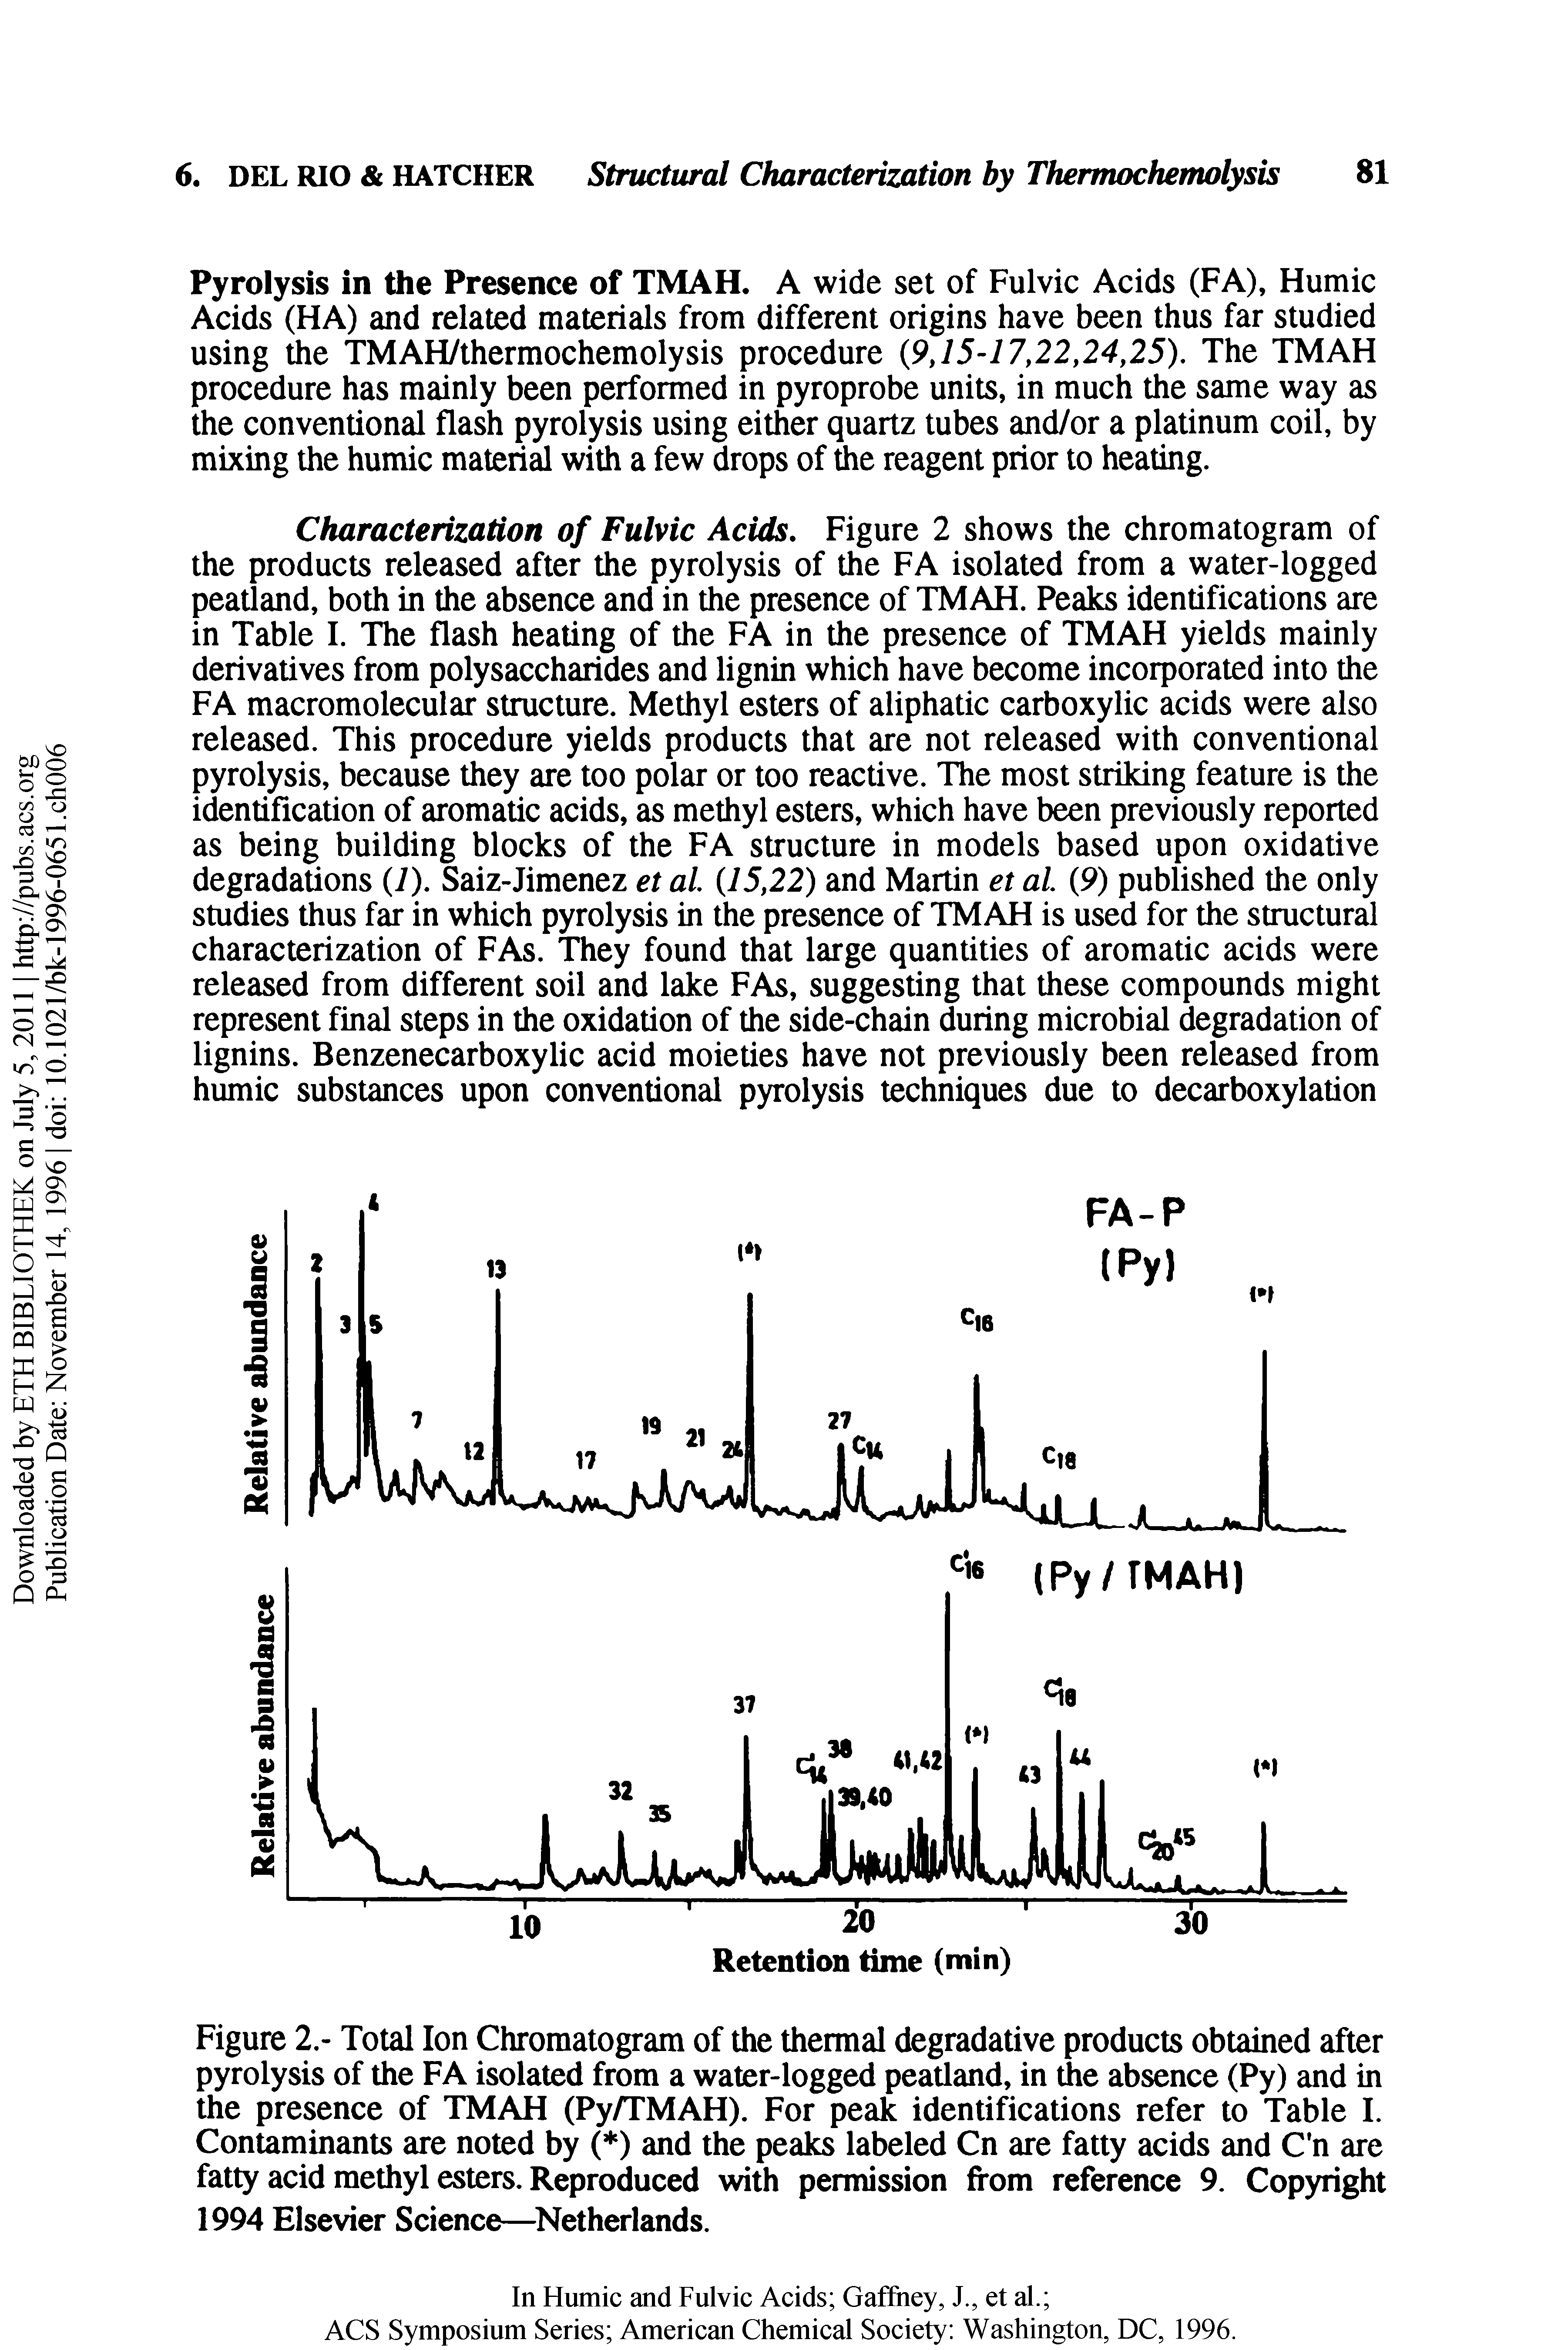 Figure 2.- Total Ion Chromatogram of the thermal degradative products obtained after pyrolysis of the FA isolated from a water-logged peatland, in the absence (Py) and in the presence of TMAH (Py/TMAH). For peak identifications refer to Table I. Contaminants are noted by ( ) and the peaks labeled Cn are fatty acids and C n are fatty acid methyl esters. Reproduced with permission from reference 9. Copyright 1994 Elsevier Science— Netherlands.